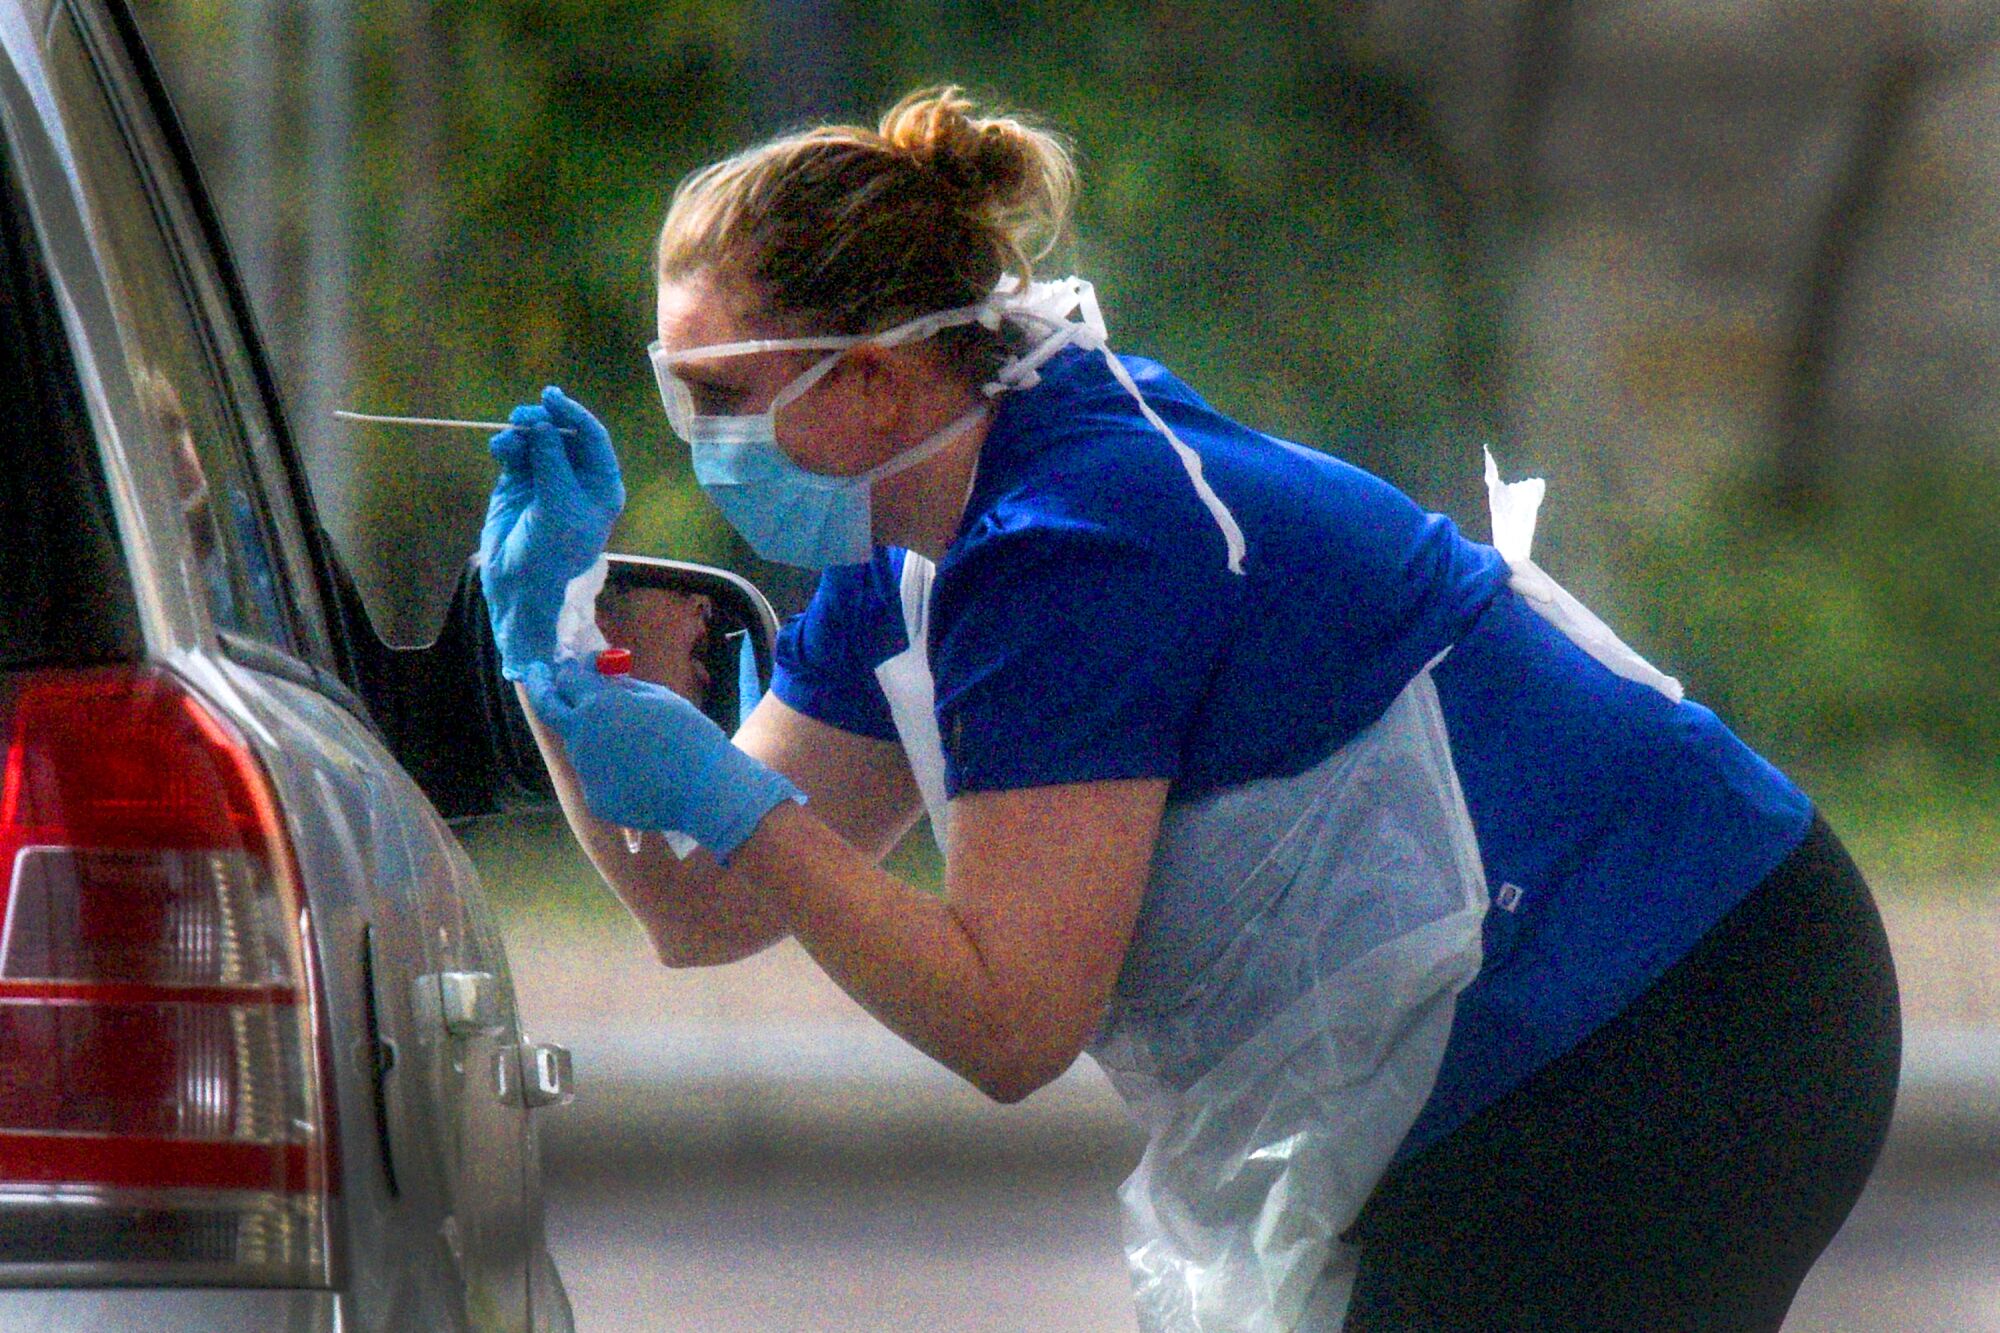 ENGLAND: A nurse prepares to swab a driver at a drive- through COVID-19 testing station in Chessington on March 28.